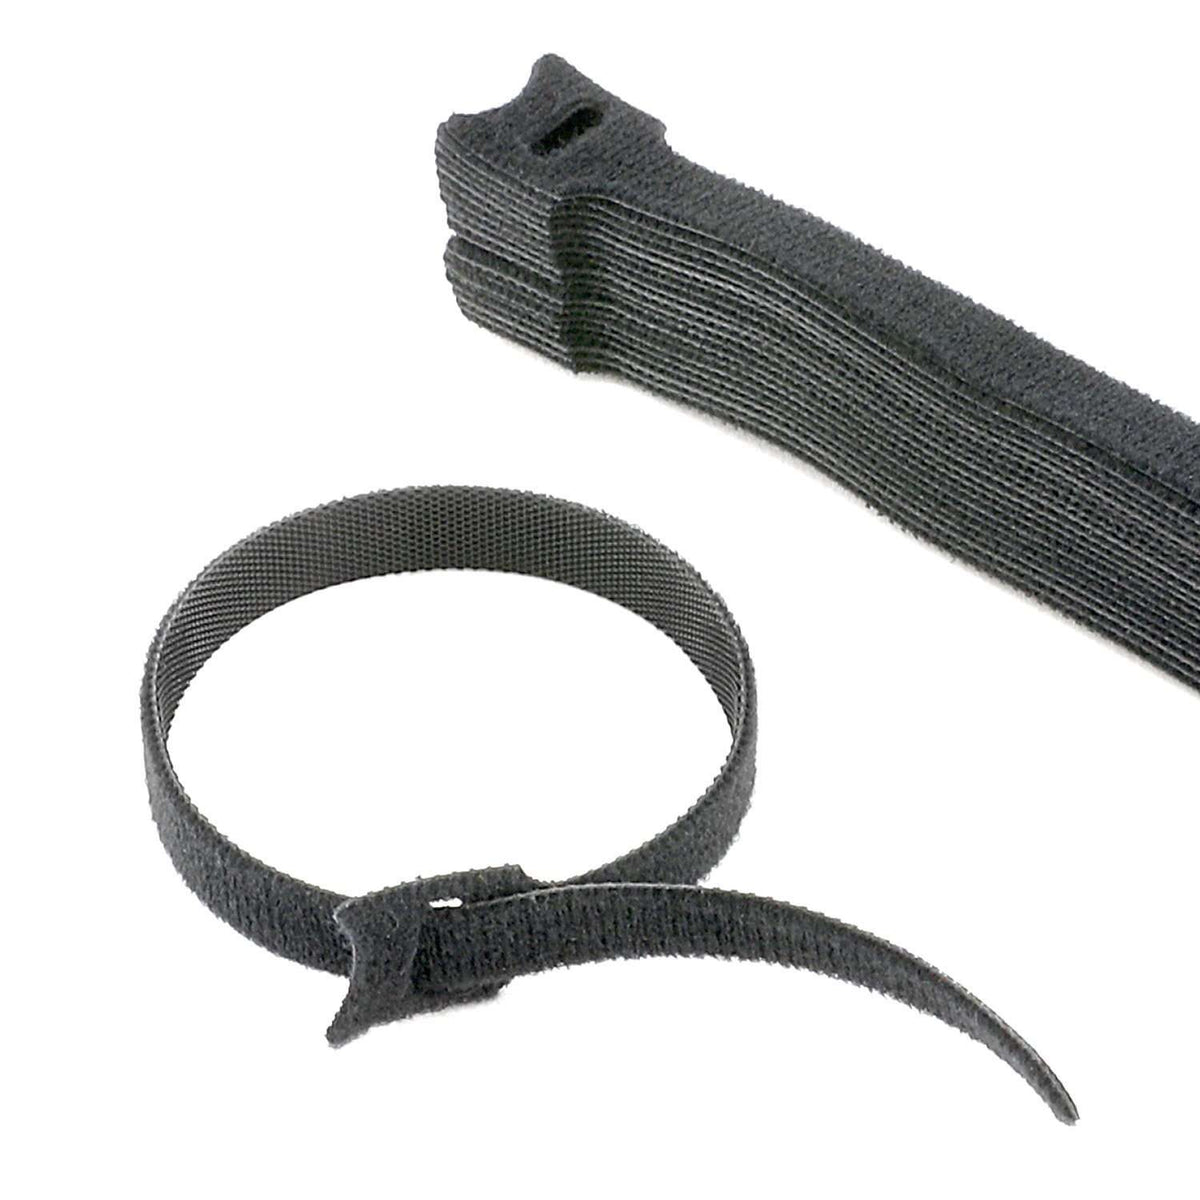 Hook-and-loop velcro straps, 12 mm. wide